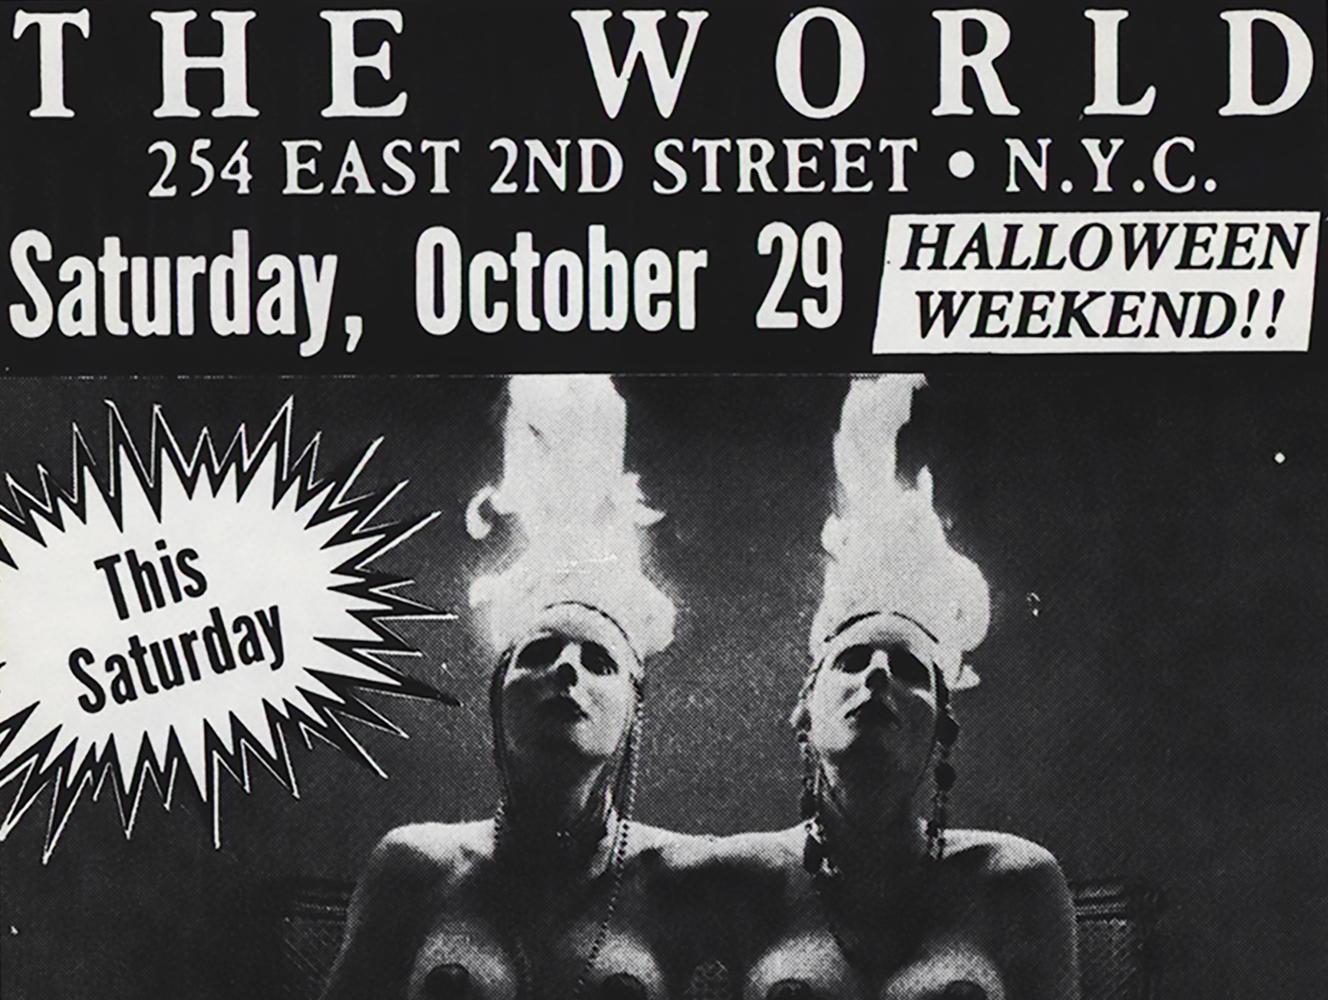 Jane's Addiction at The World Halloween weekend 1988:
Rare vintage original announcement flyer produced on the occasion of a historic 1988 Halloween weekend concert featuring Jane's Addiction; The World 254 East 2nd street New York, New York.